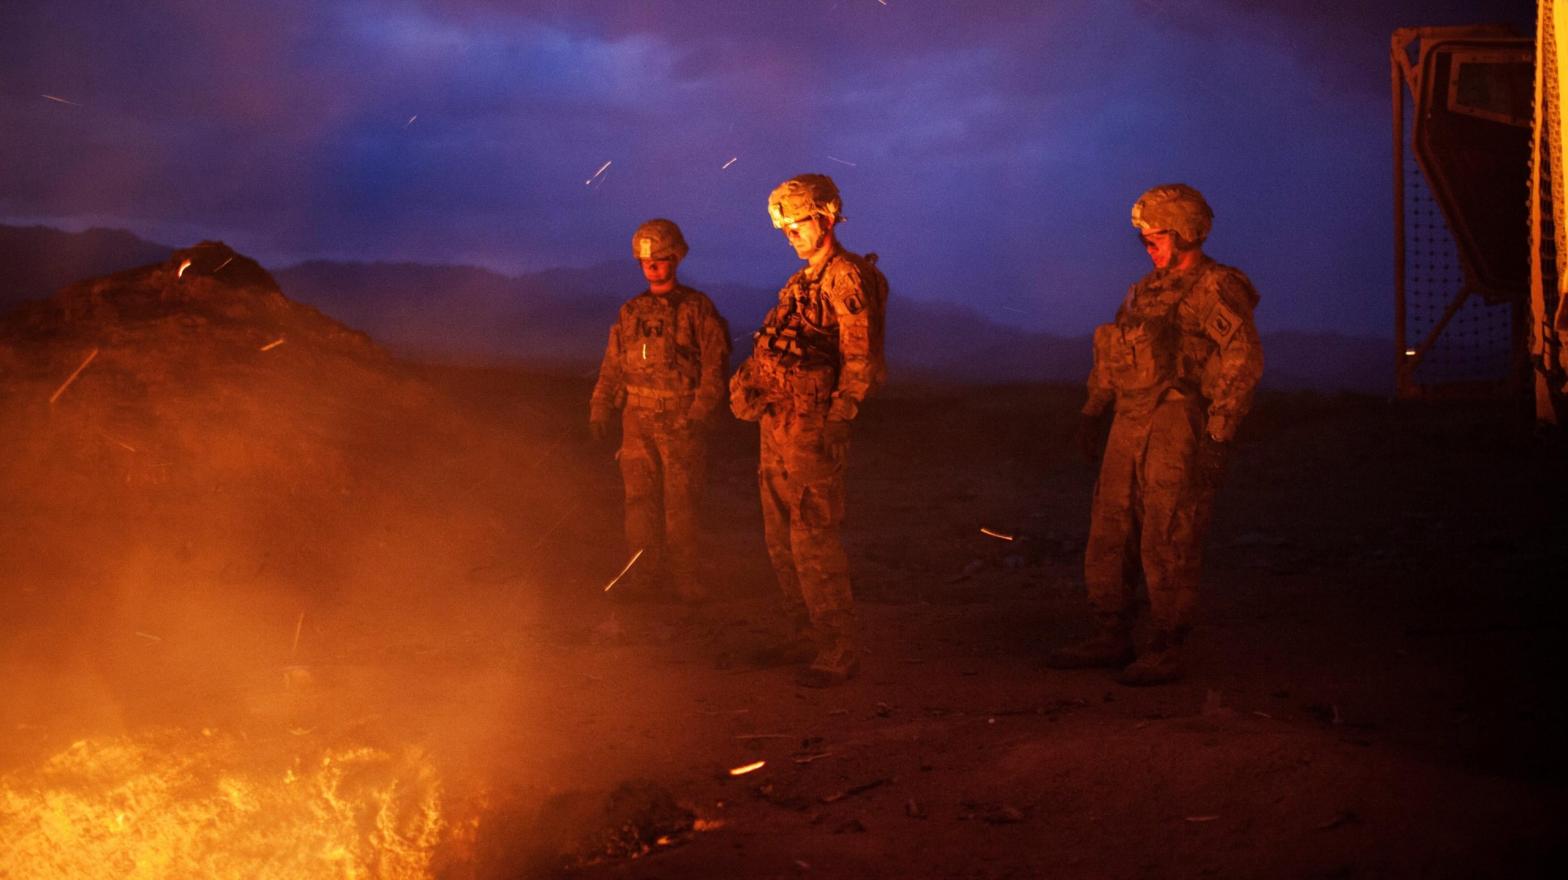 U.S. soldiers burn trash in a pit outside a base in Jaghatu, Afghanistan, in 2012. Military burn pits have been linked to cancers and other diseases among veterans. (Photo: Lorenzo Tugnoli for the Washington Post, Getty Images)